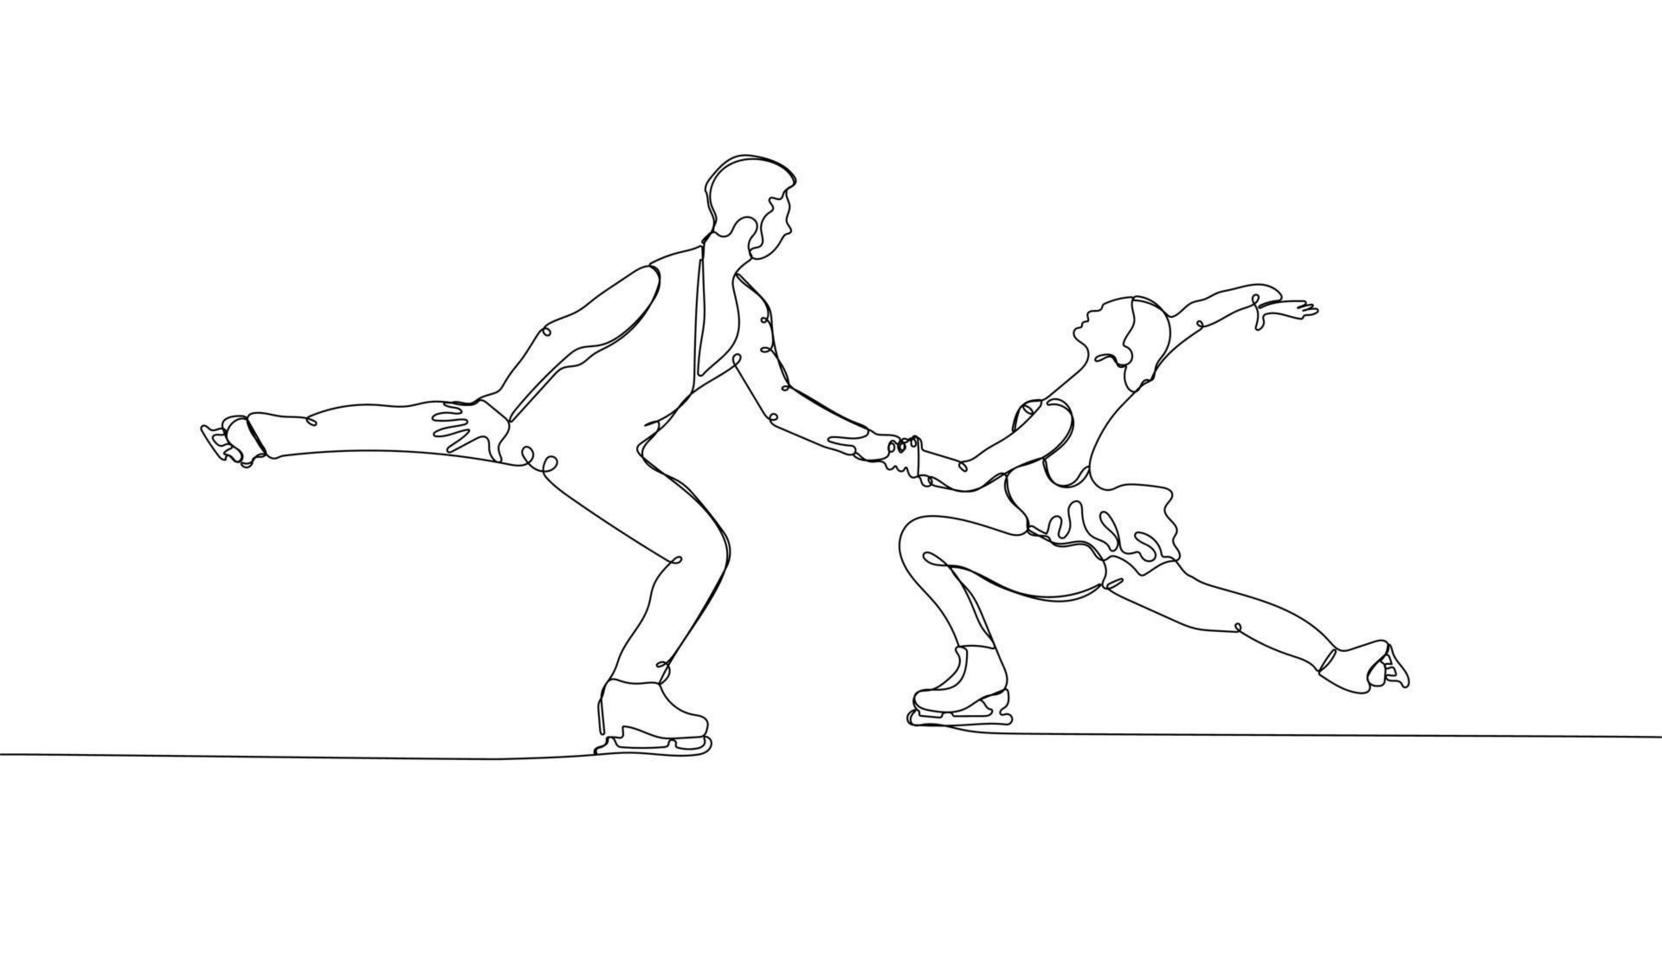 Continuous one line drawing of pair Figure skating vector